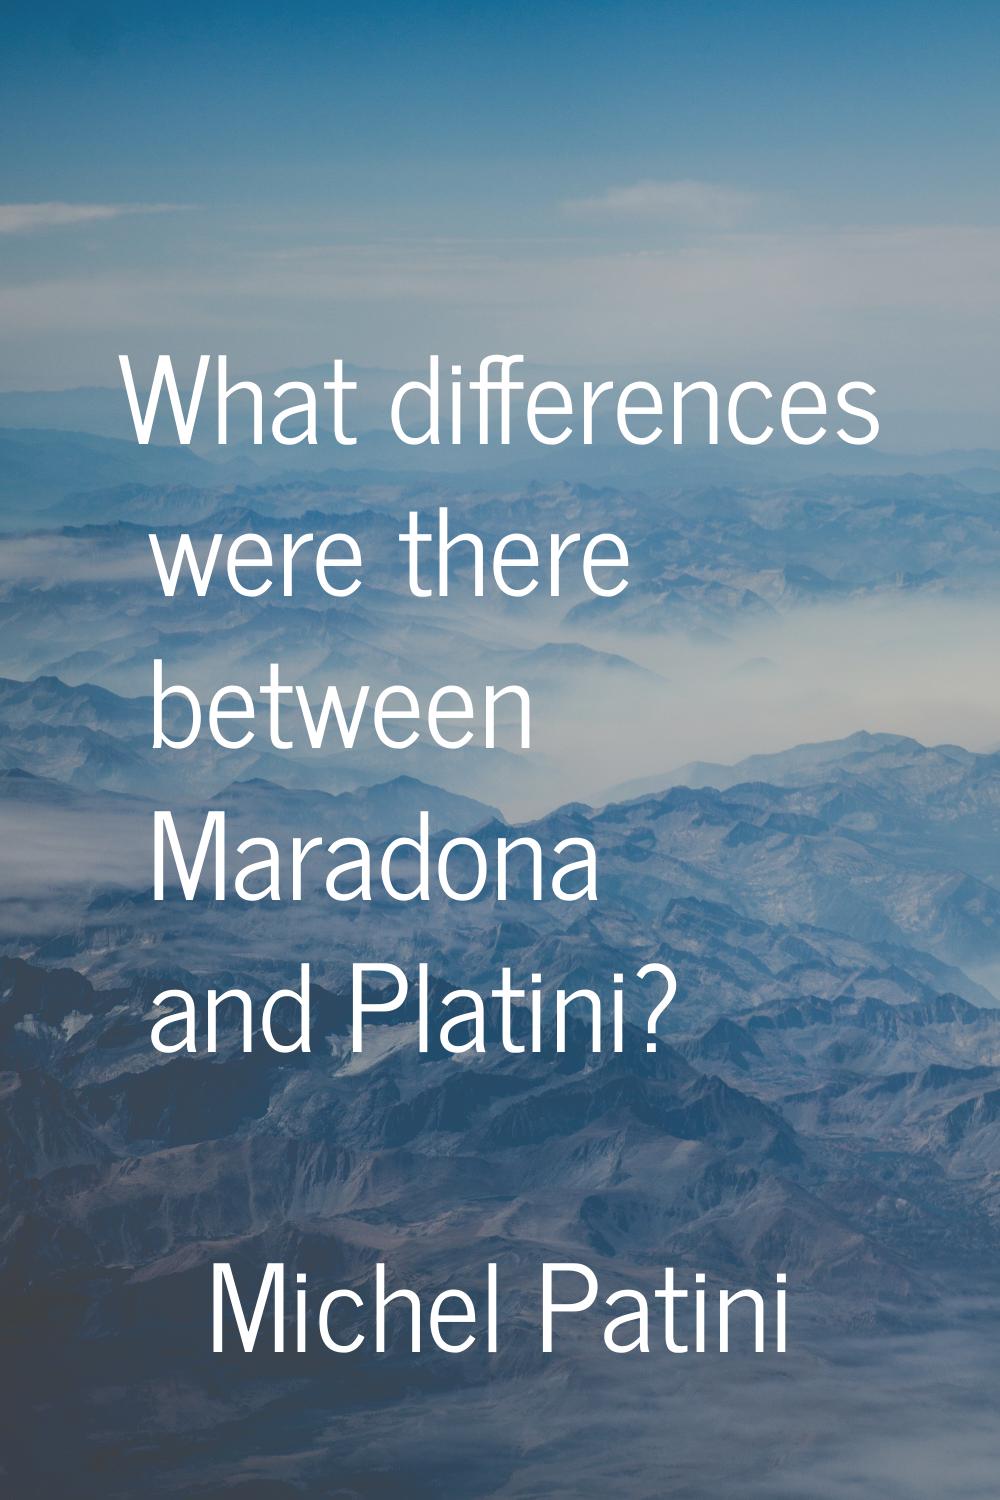 What differences were there between Maradona and Platini?